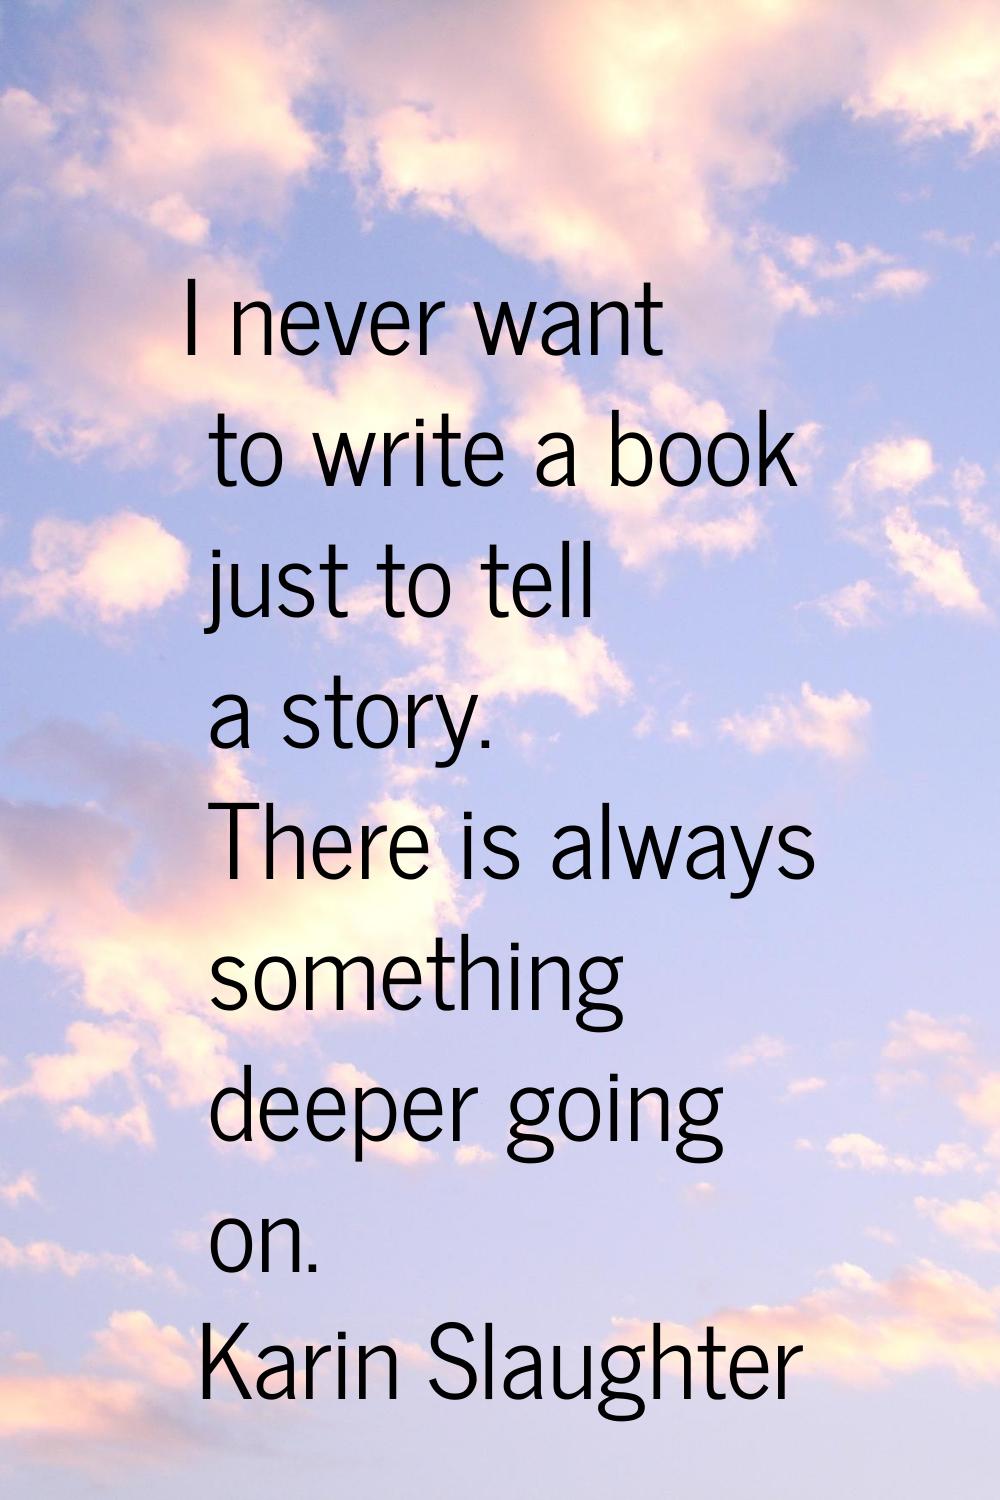 I never want to write a book just to tell a story. There is always something deeper going on.